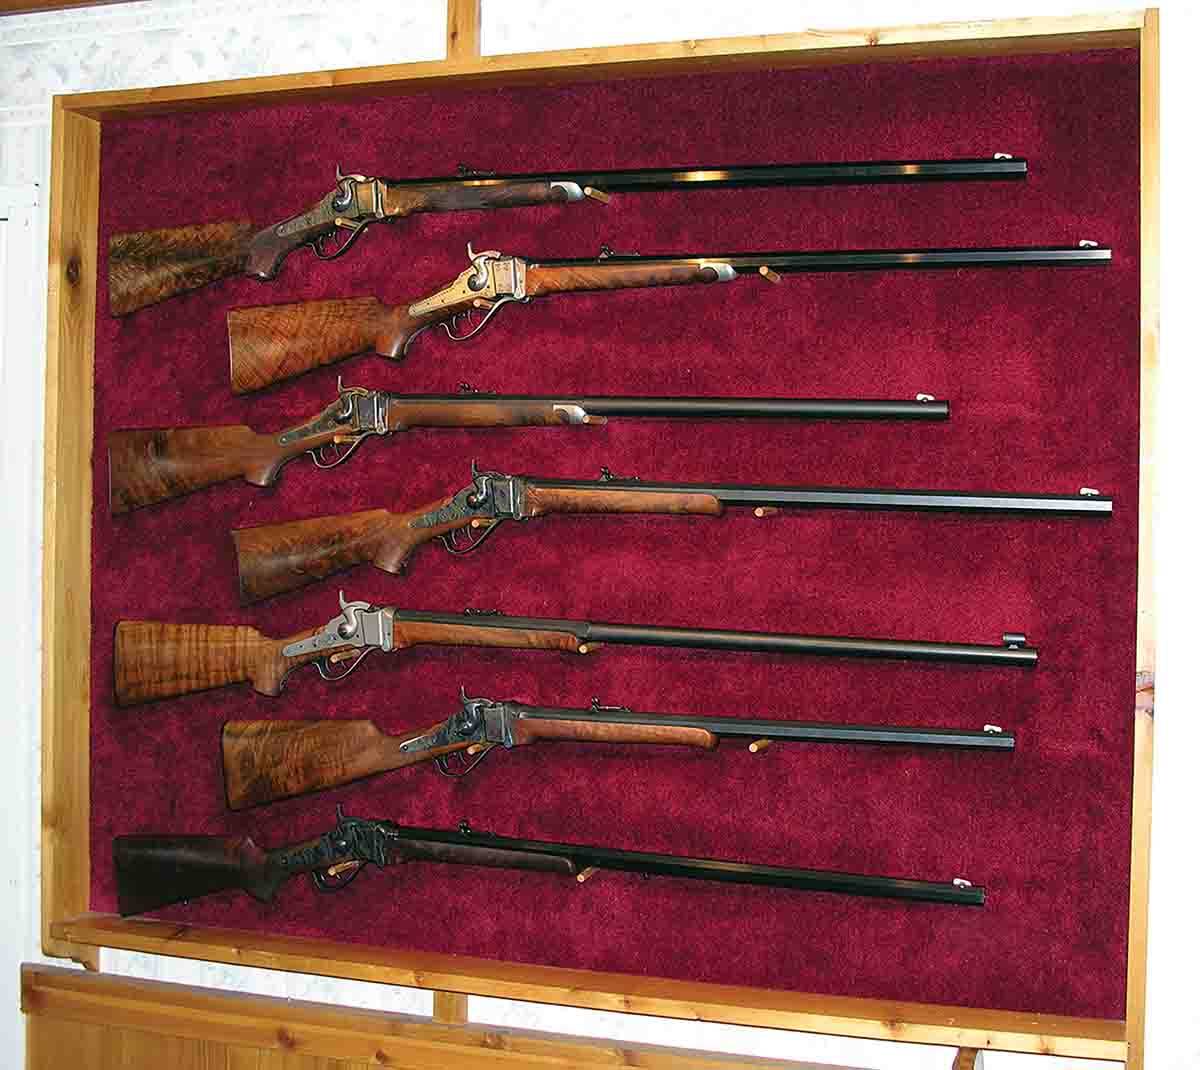 This is just one display of many at the Shiloh Rifle Manufacturing Company showroom in Big Timber, Montana.